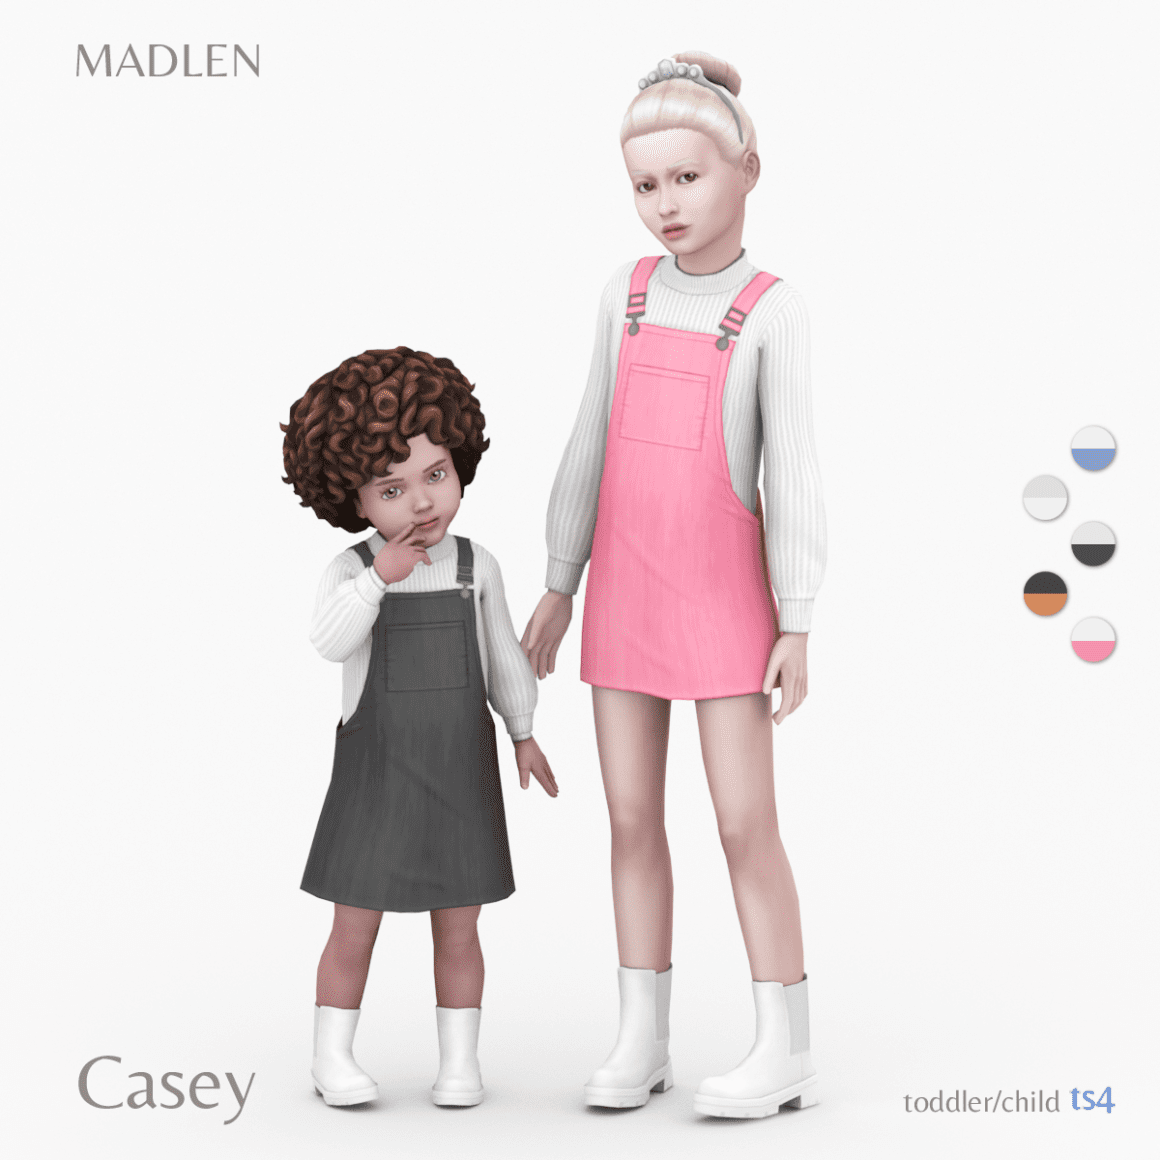 Sims 4 Kids Casey Outfit